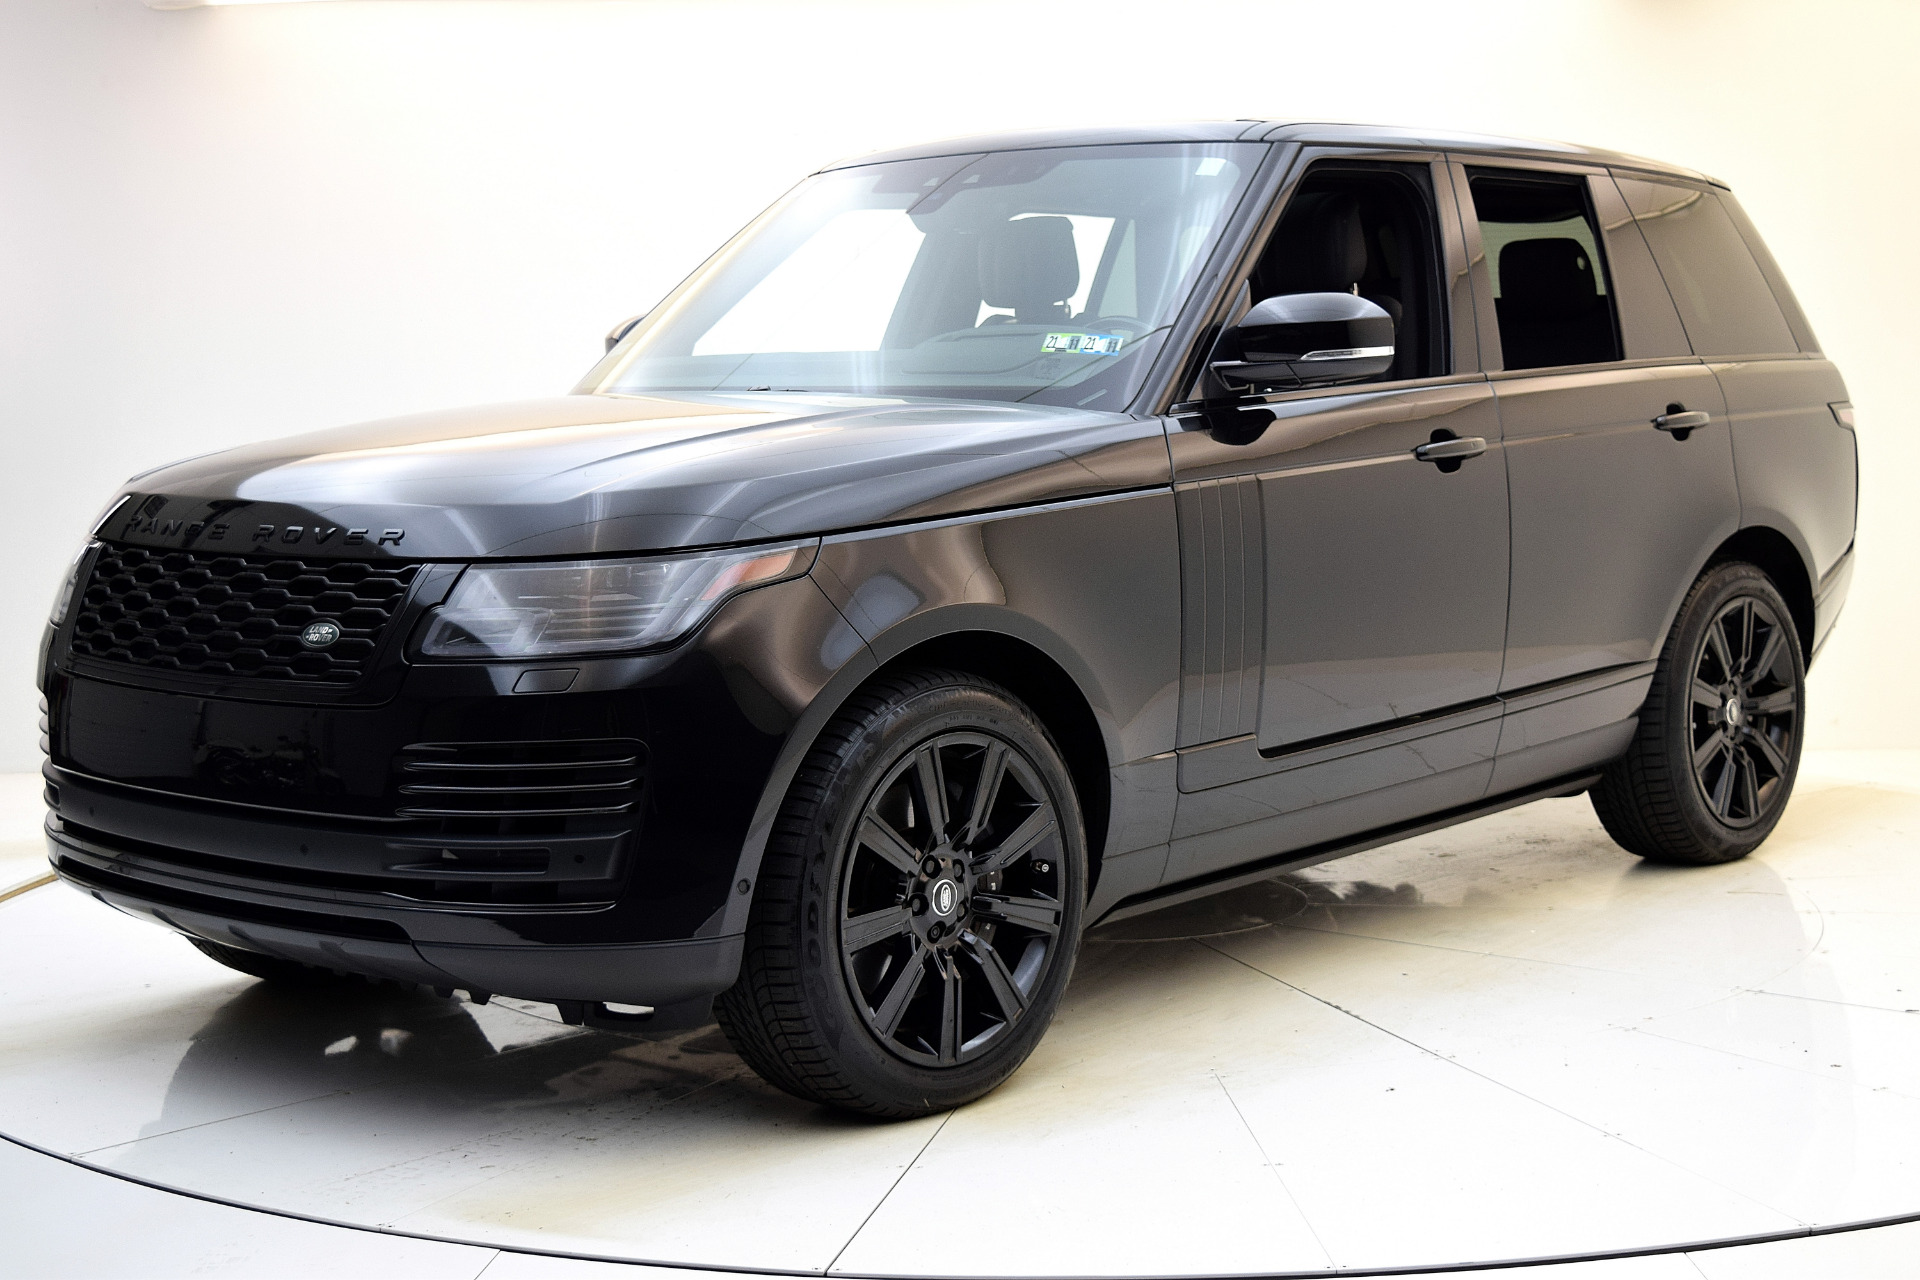 Used 2019 Land Rover Range Rover SC for sale Sold at Bentley Palmyra N.J. in Palmyra NJ 08065 2